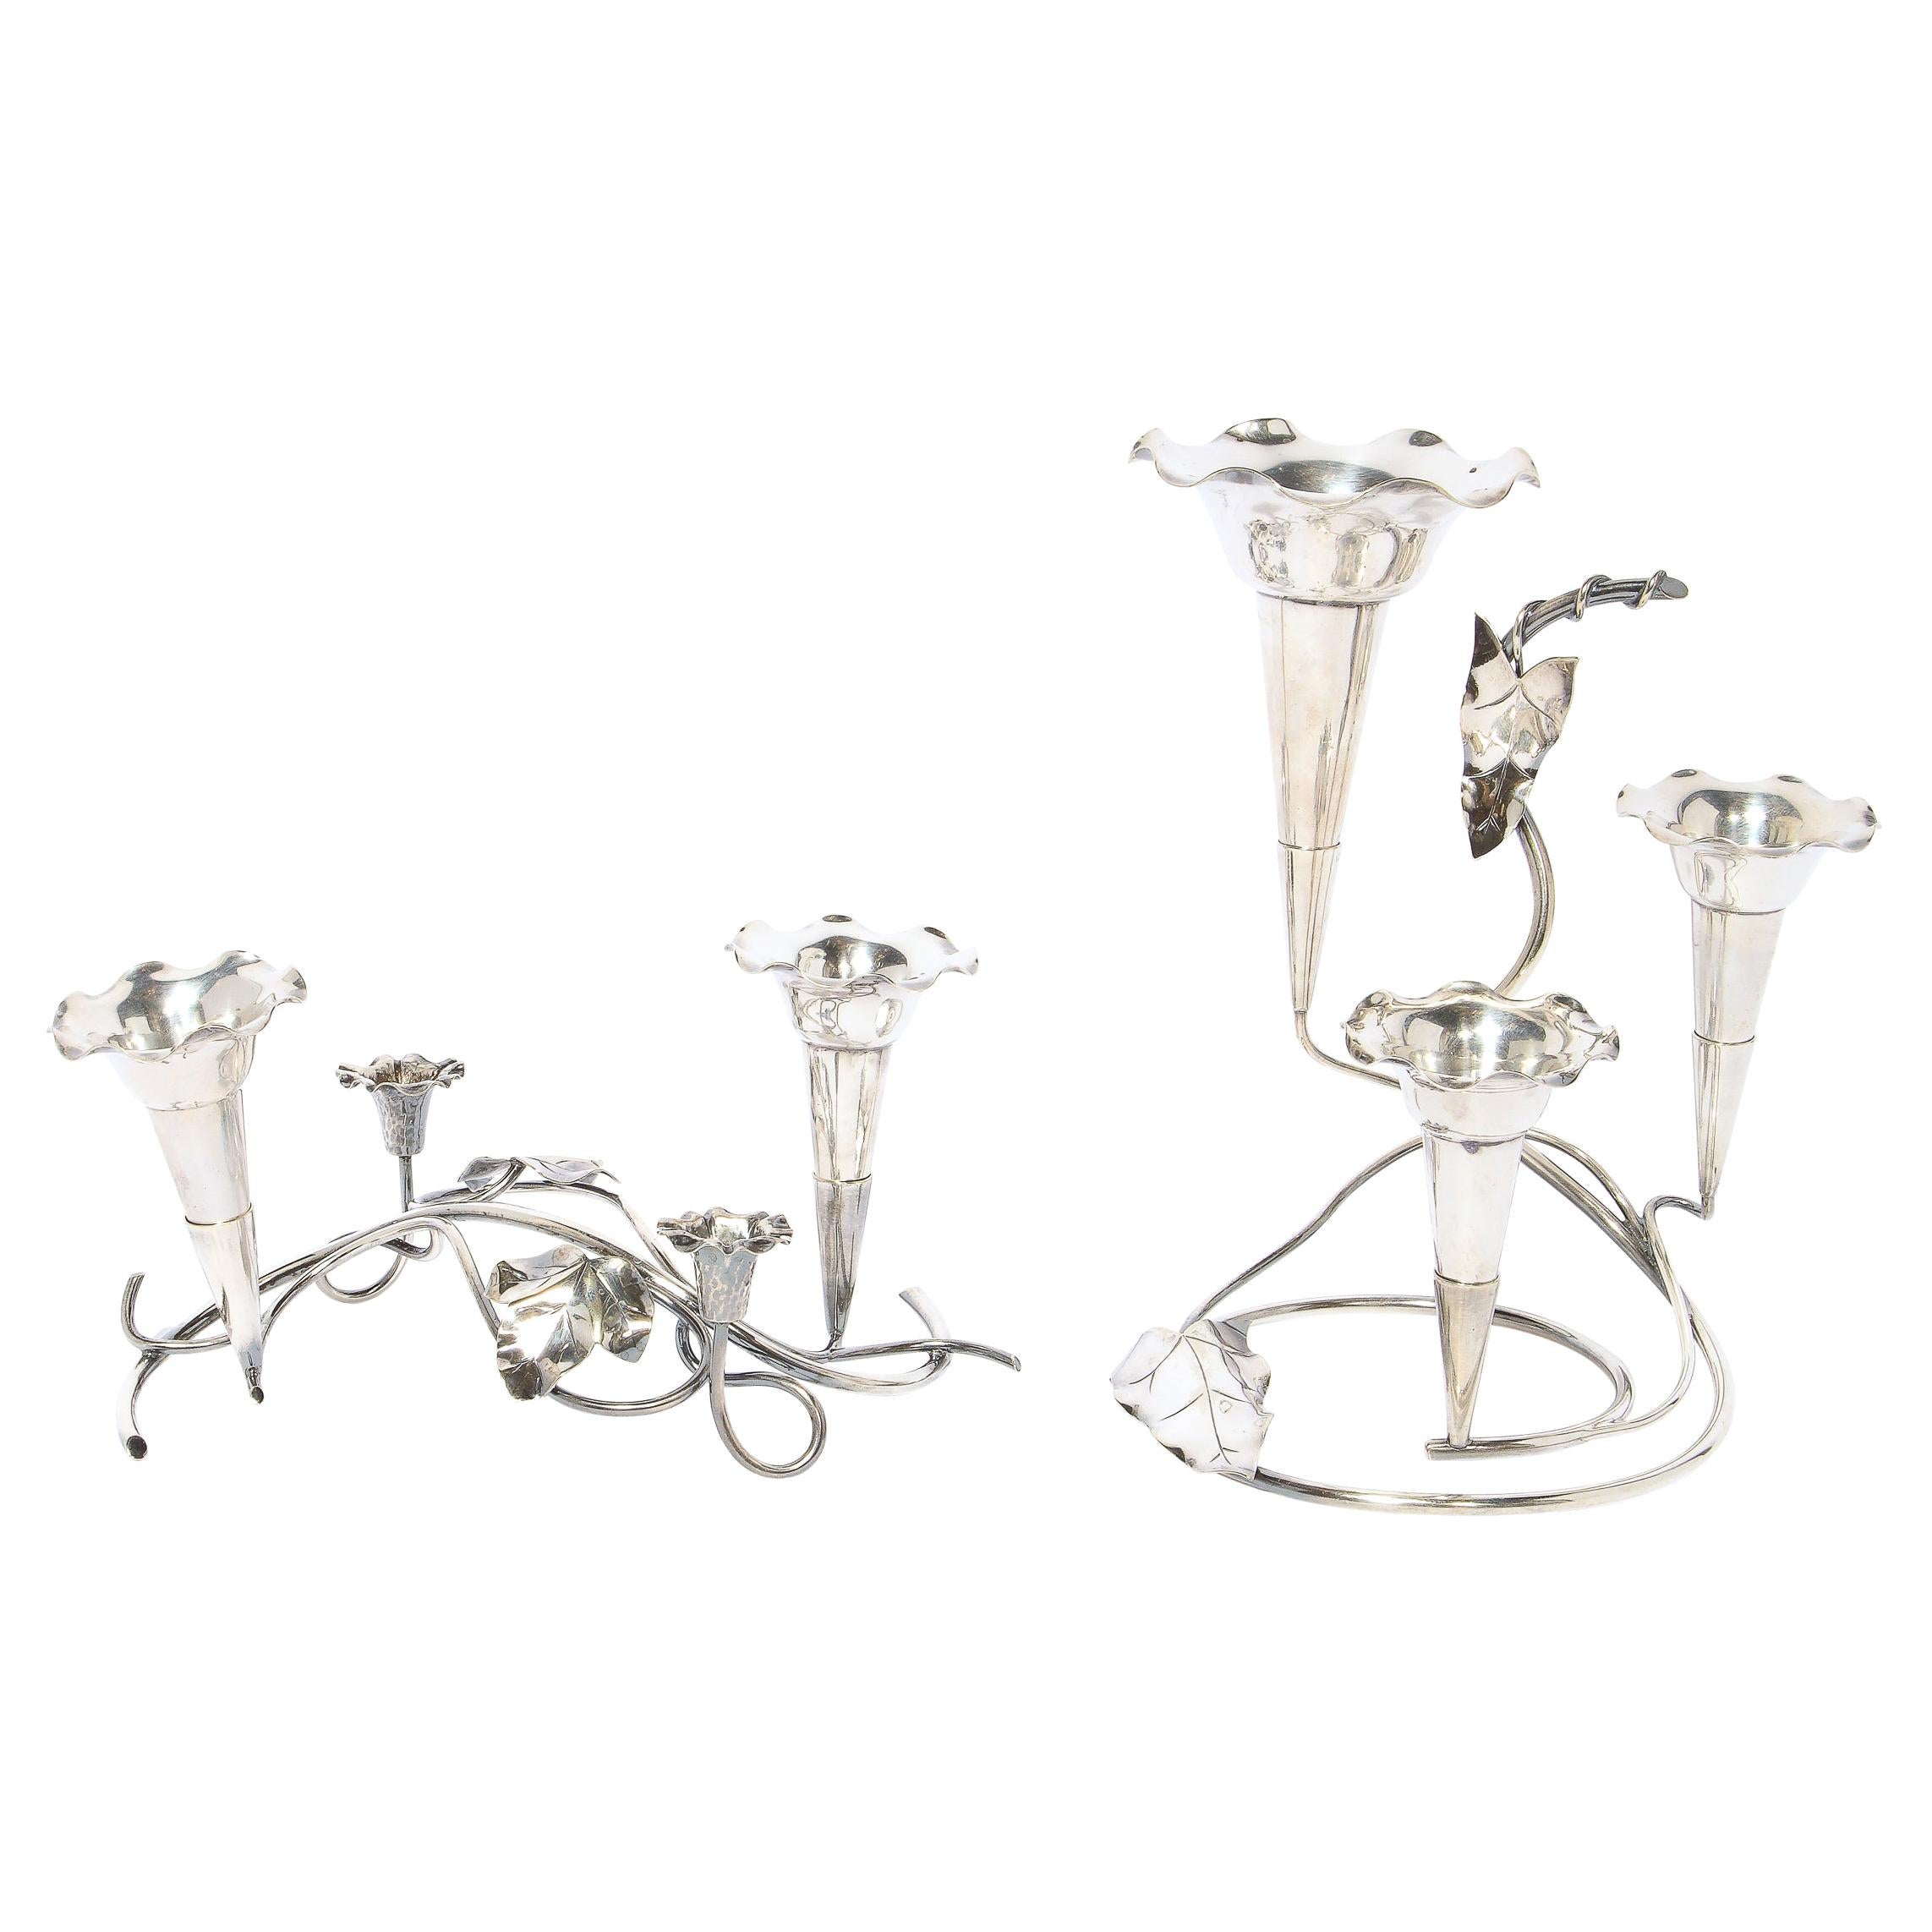 Pair of Art Nouveau Morning Glory Silver Plated Candelabras For Sale